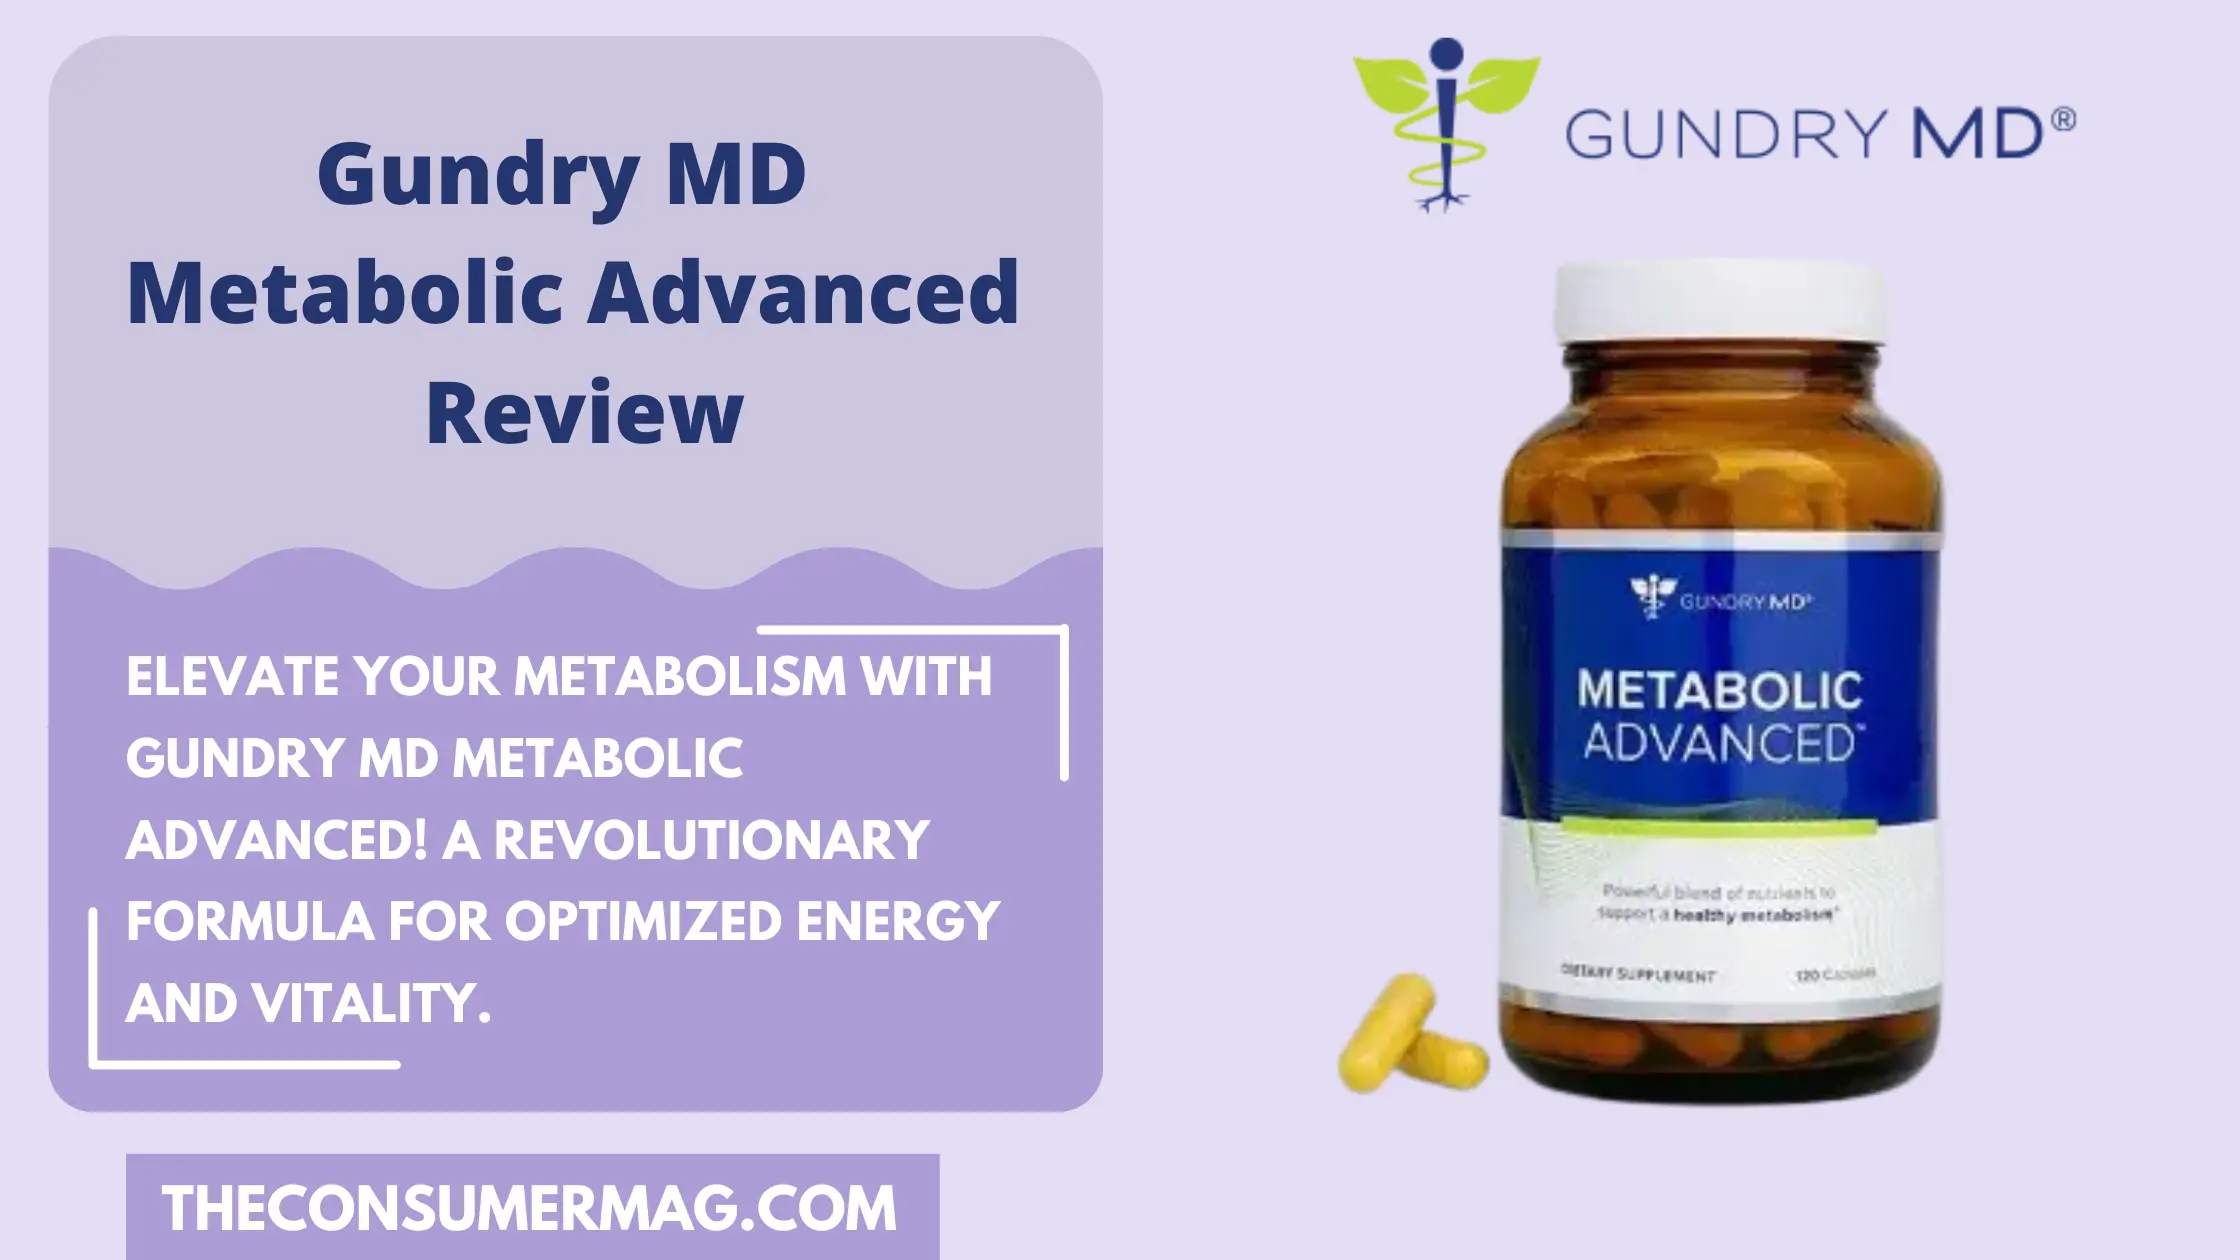 Gundry MD Metabolic Advanced Review: Best Metabolic Supplement?